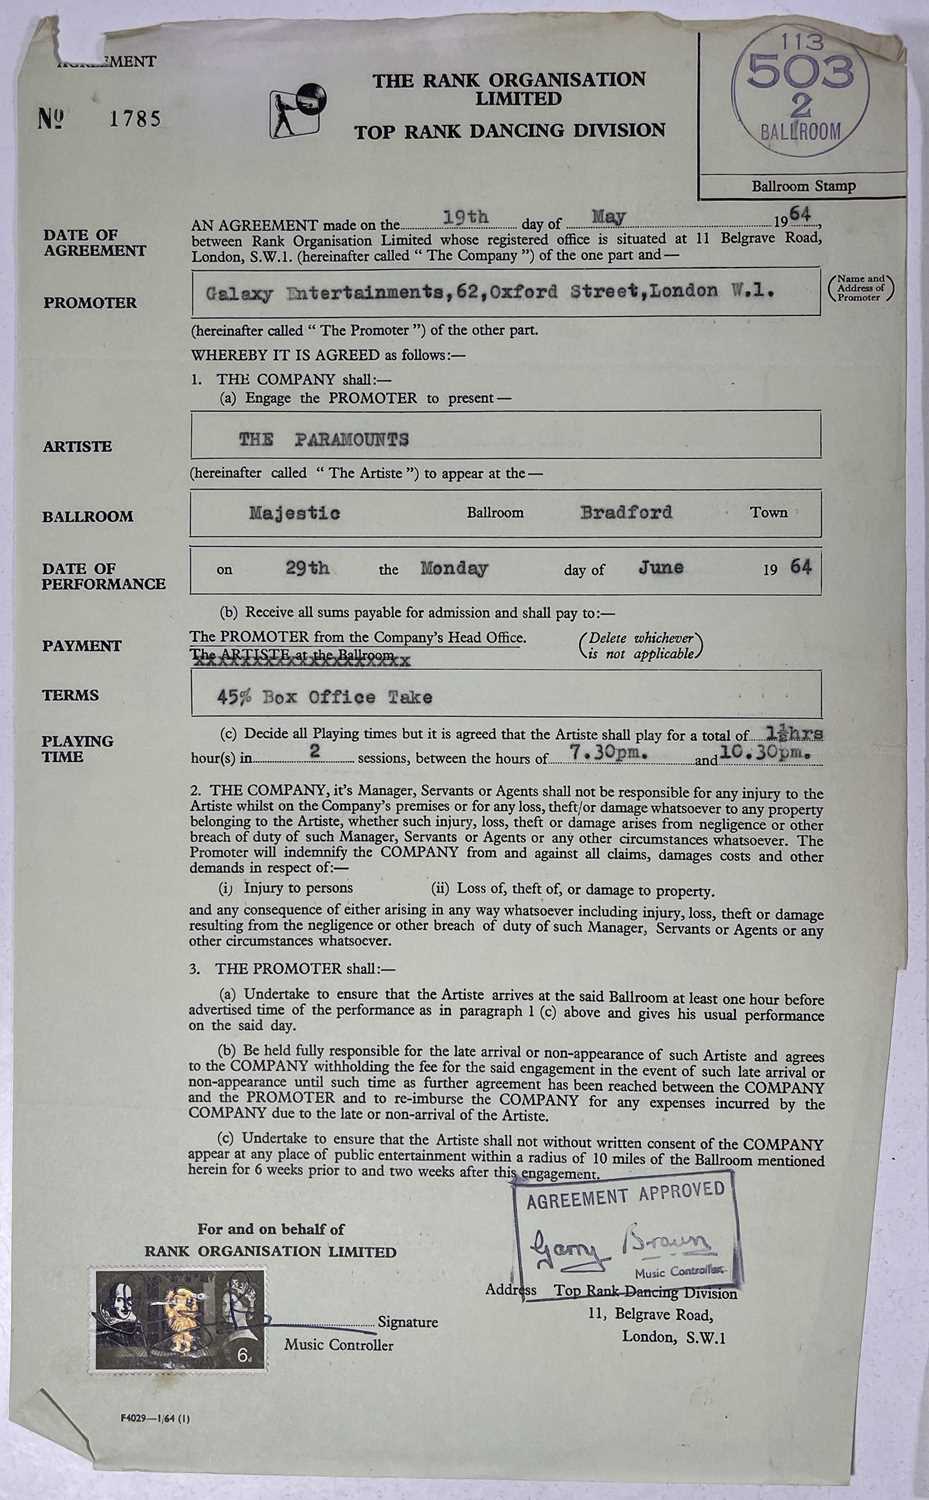 PROCOL HARUM INTEREST - THE PARAMOUNTS - 1964 BOOKING CONTRACTS. - Image 2 of 4